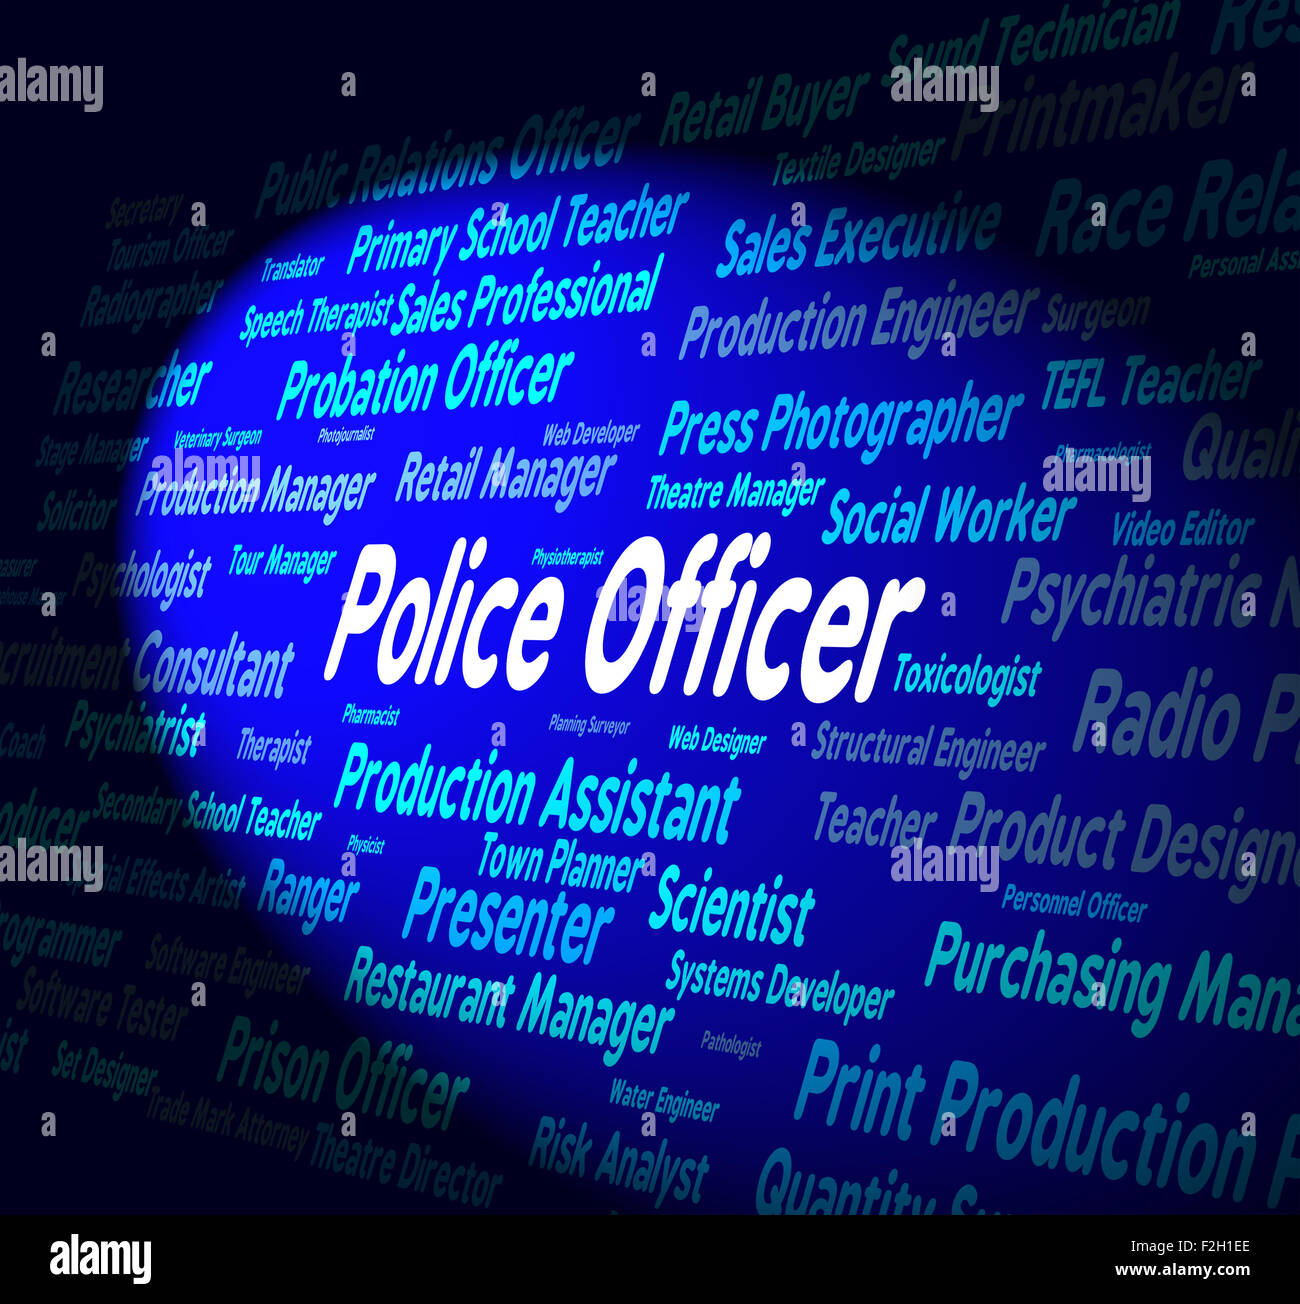 Police Officer Indicating Law Enforcement And Employee Stock Photo